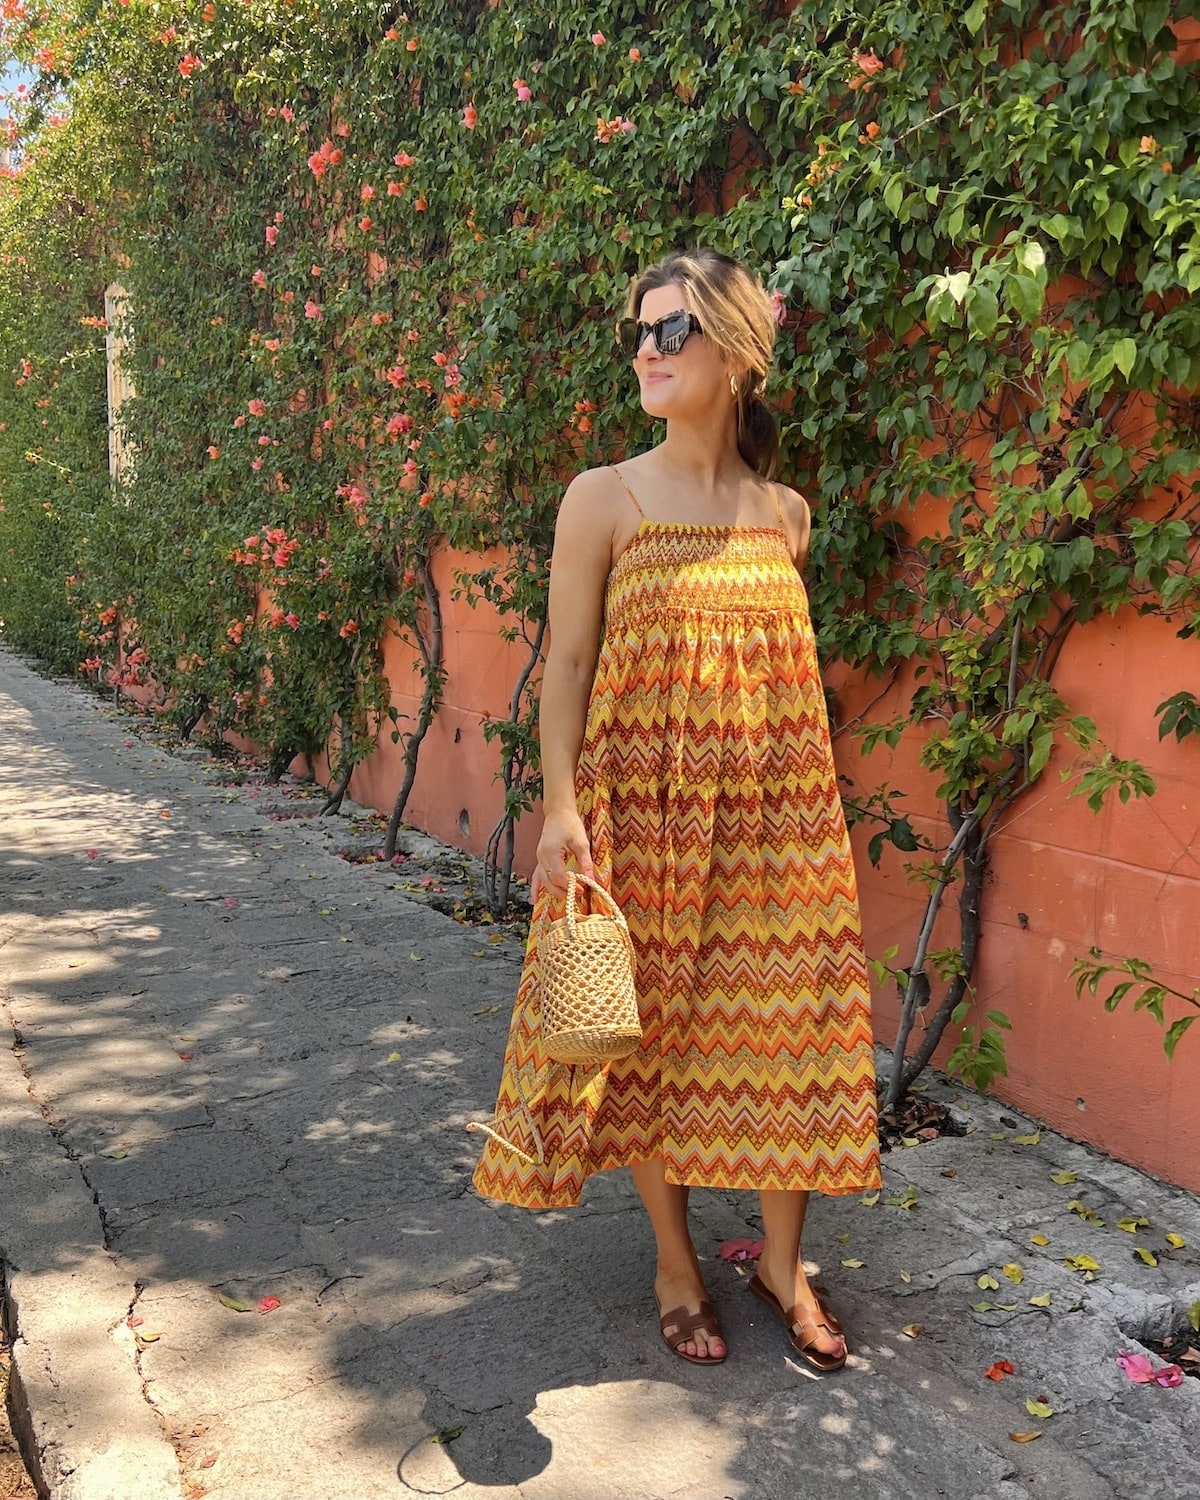 Brighton butler wearing orange and yellow dress with hermes sandals in san miguel sandal review